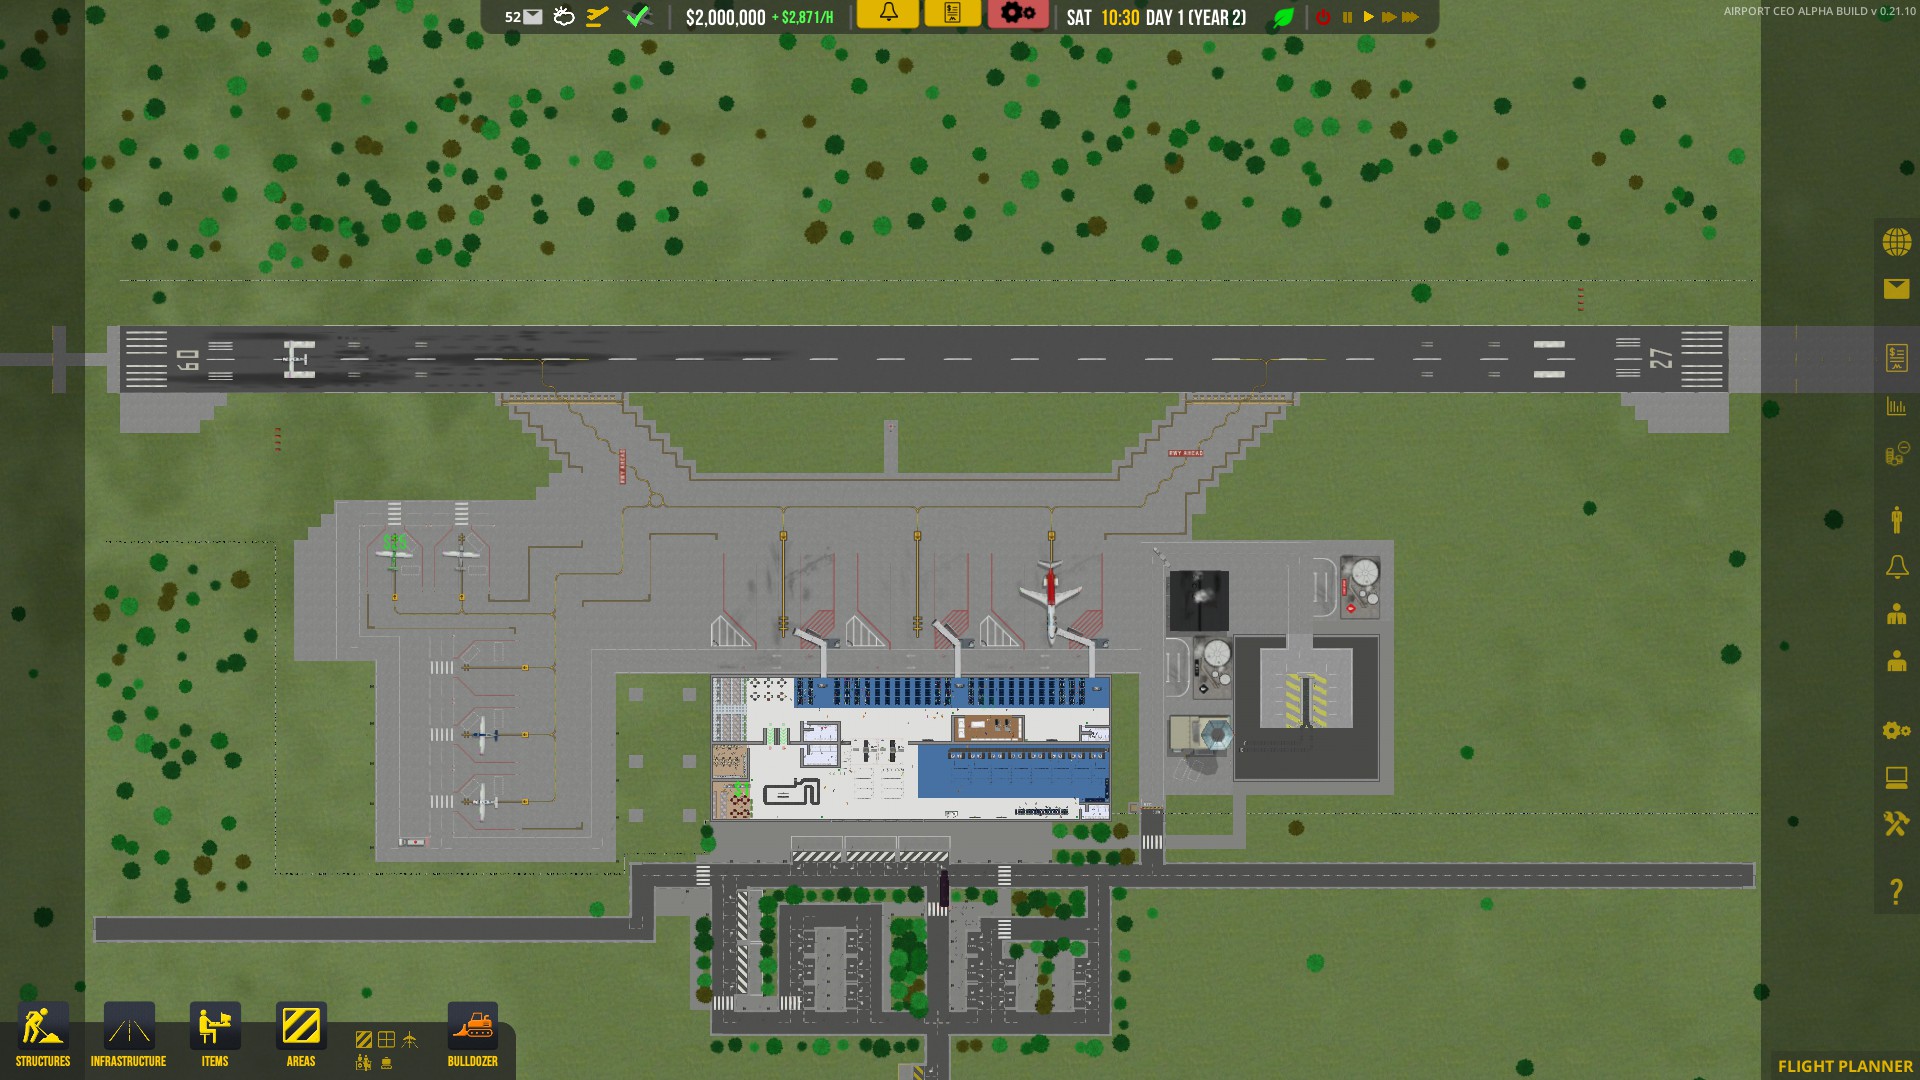 airport ceo layout